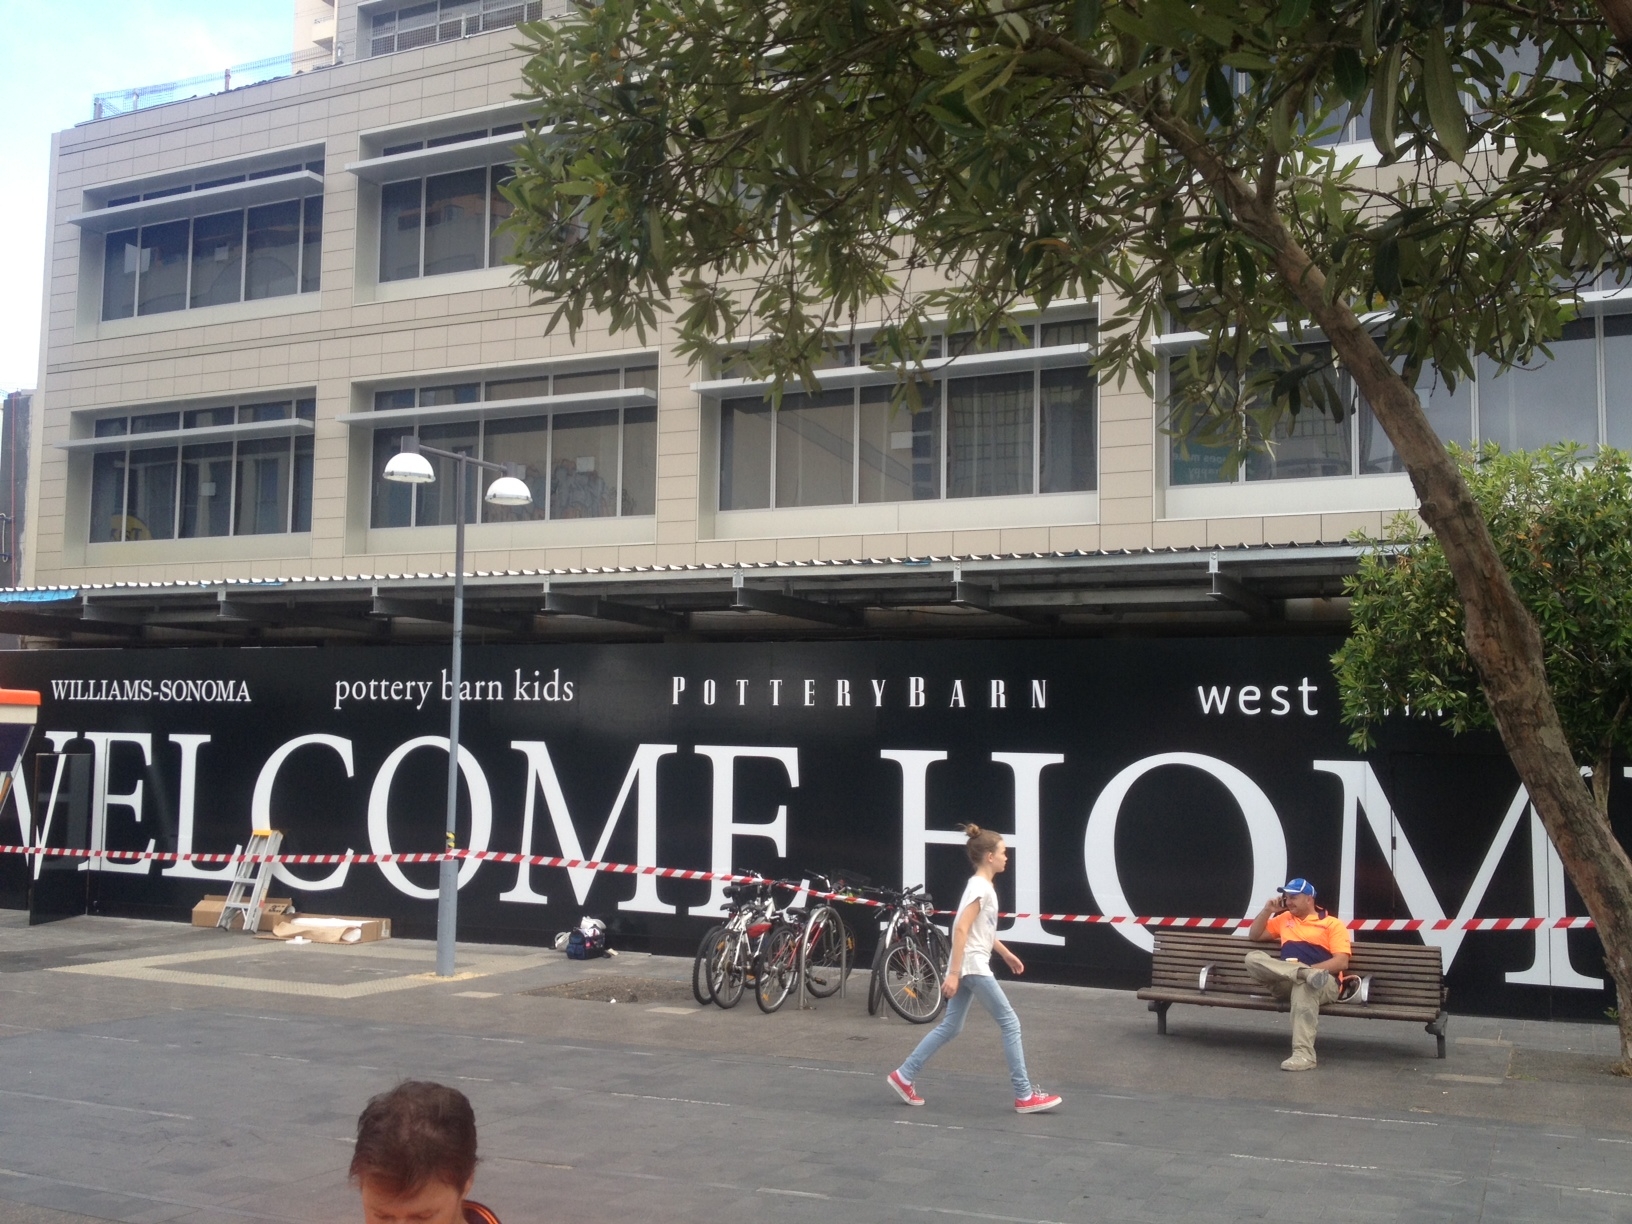 Excitement is building around the new stores in Bondi Junction